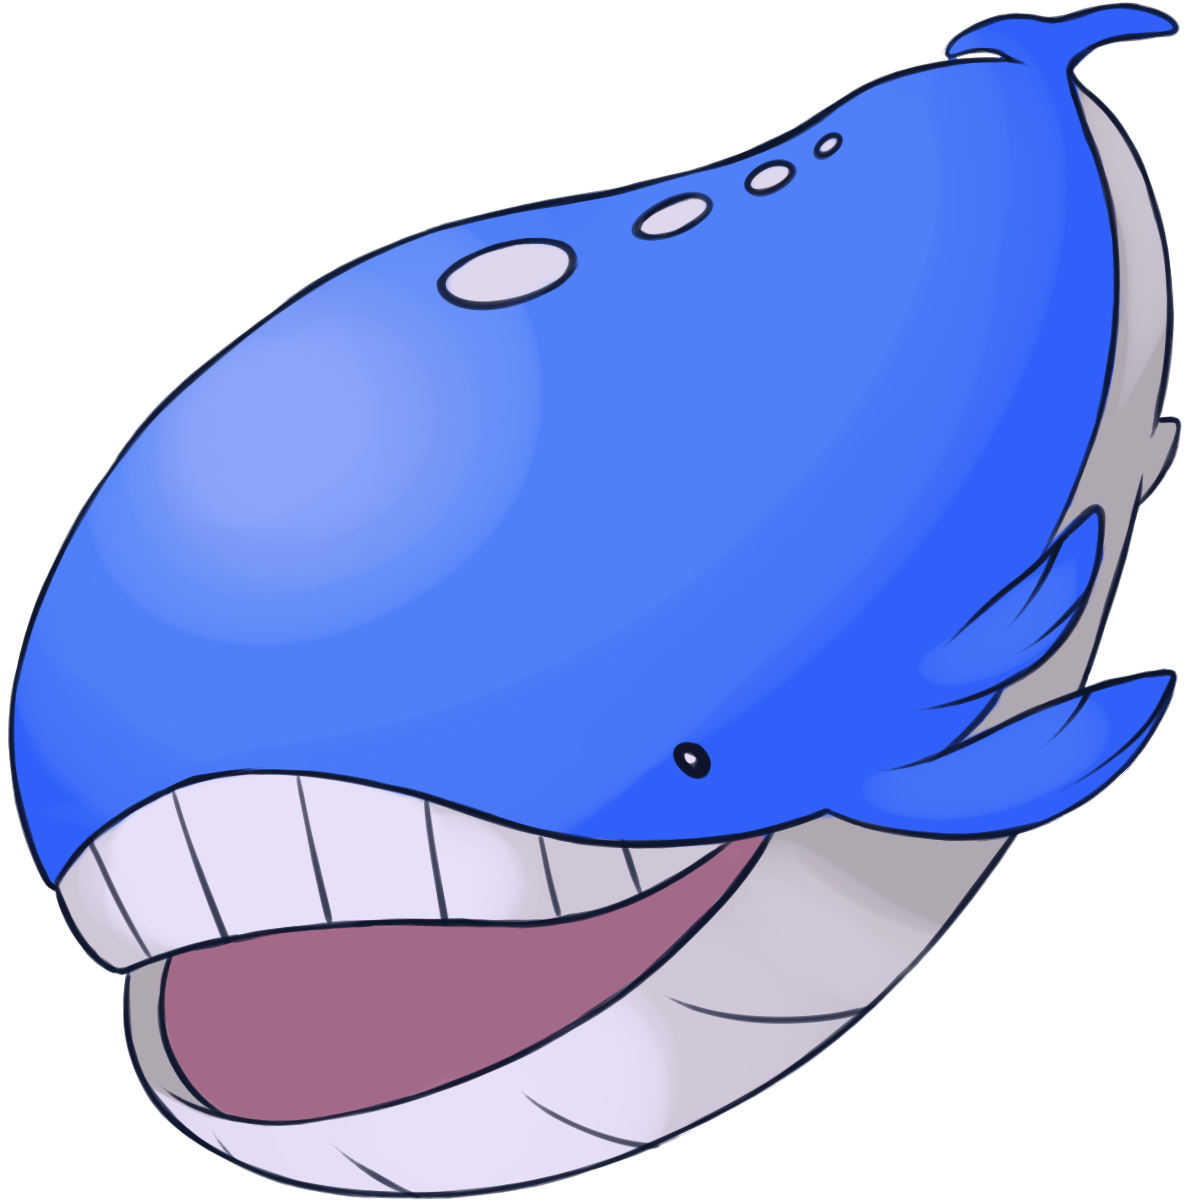 Wailord Pokemon PNG Clipart Background